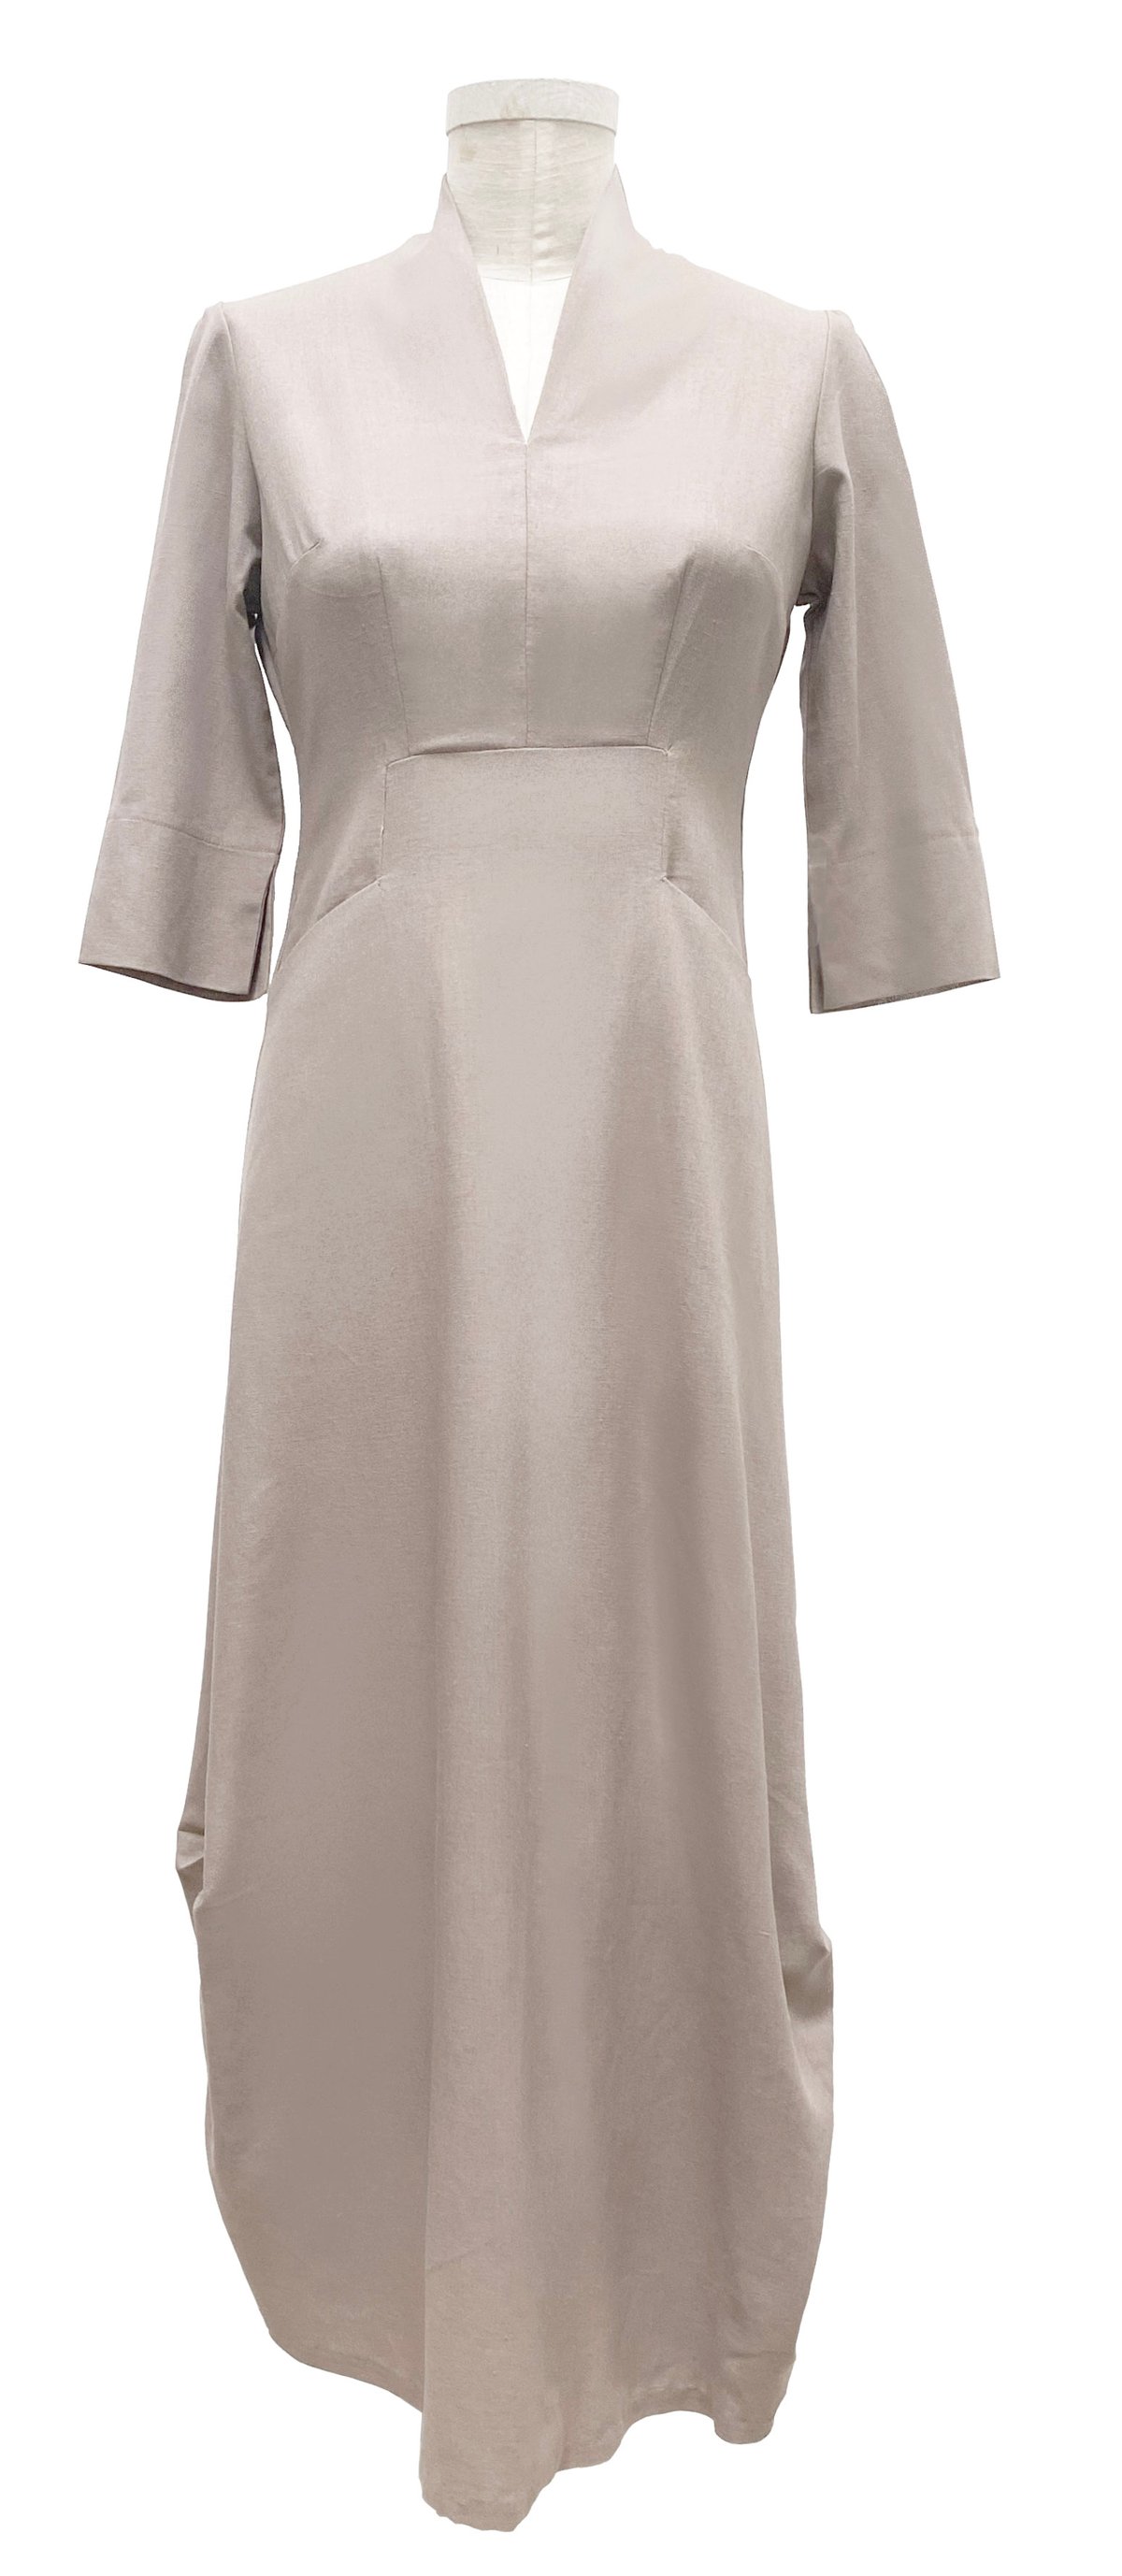 Image of Lazarus dress in natural